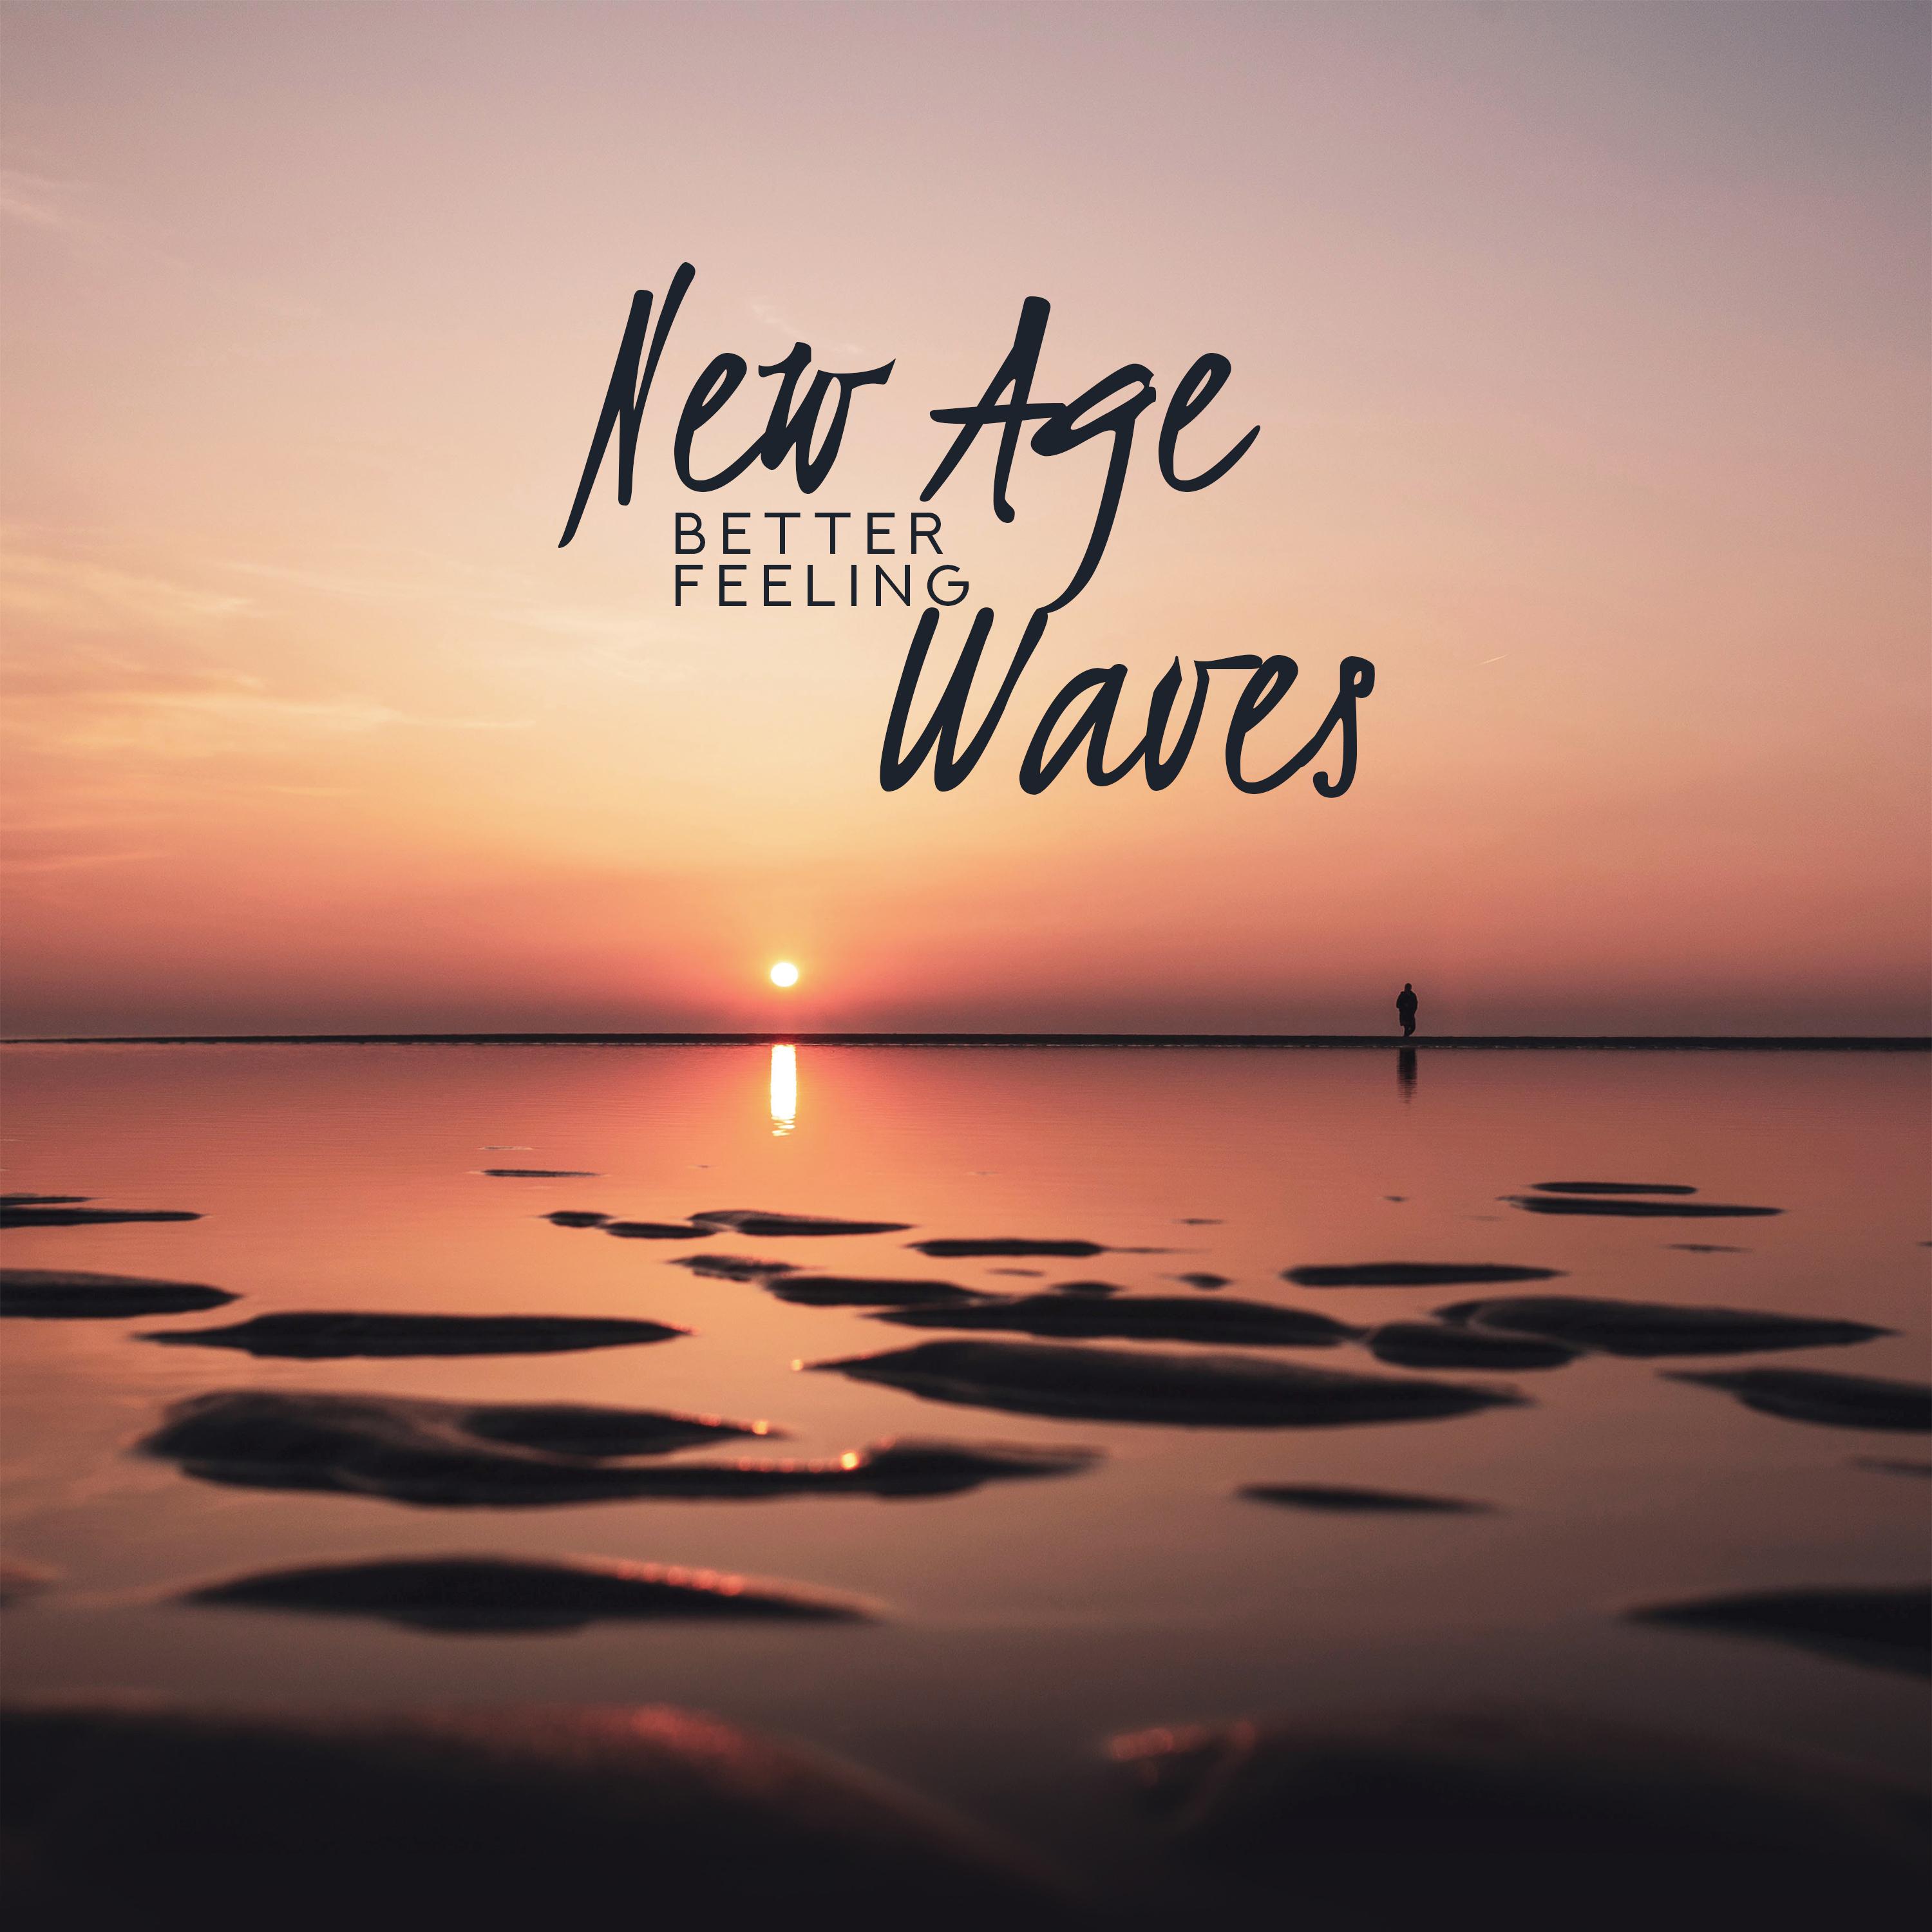 New Age Better Feeling Waves: 2019 Ambient Music Mix for Best Relaxation Time, Total Calming Down, Stress Relief, Mood Improve